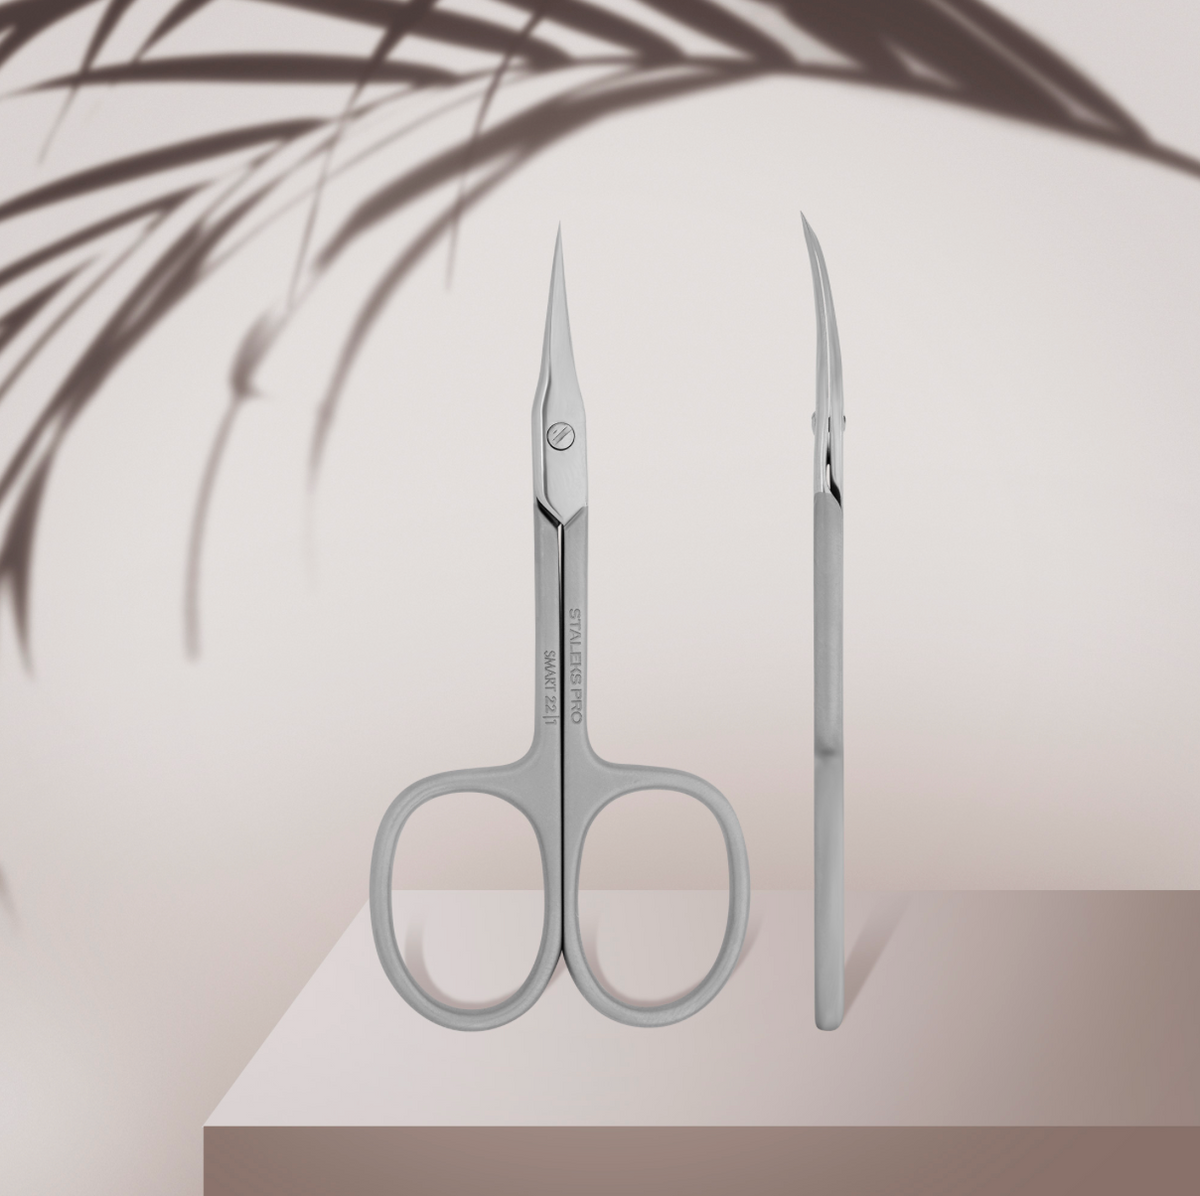 Hans Kniebes 2-in-1 Nail Scissors with Blades for Cuticles Stainless Steel